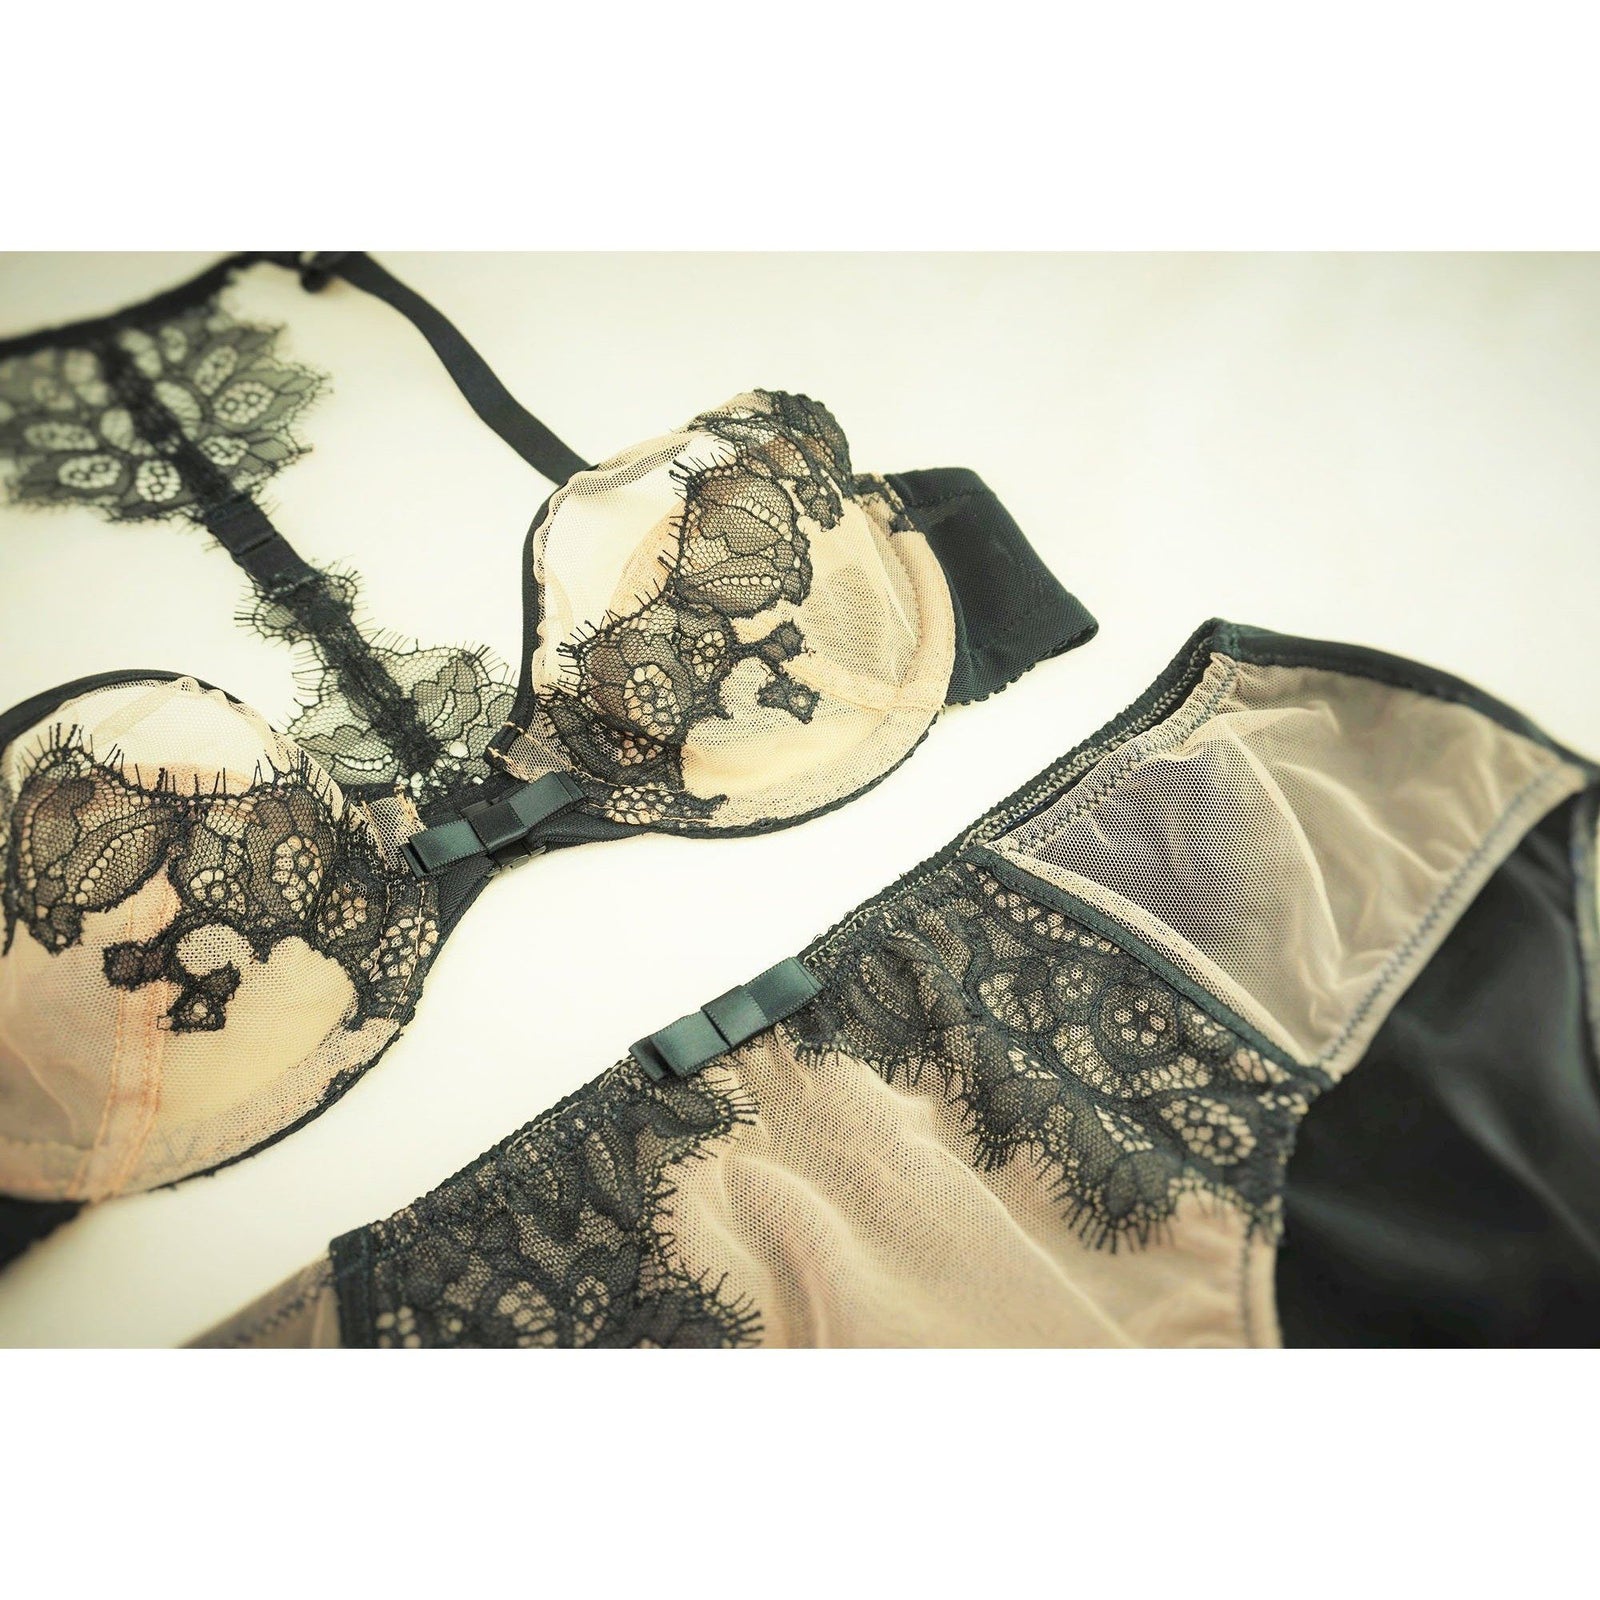 Lingerie Set - Amber Kai Allister With Lace Applique & Meena Kay Panties In Nude/Black